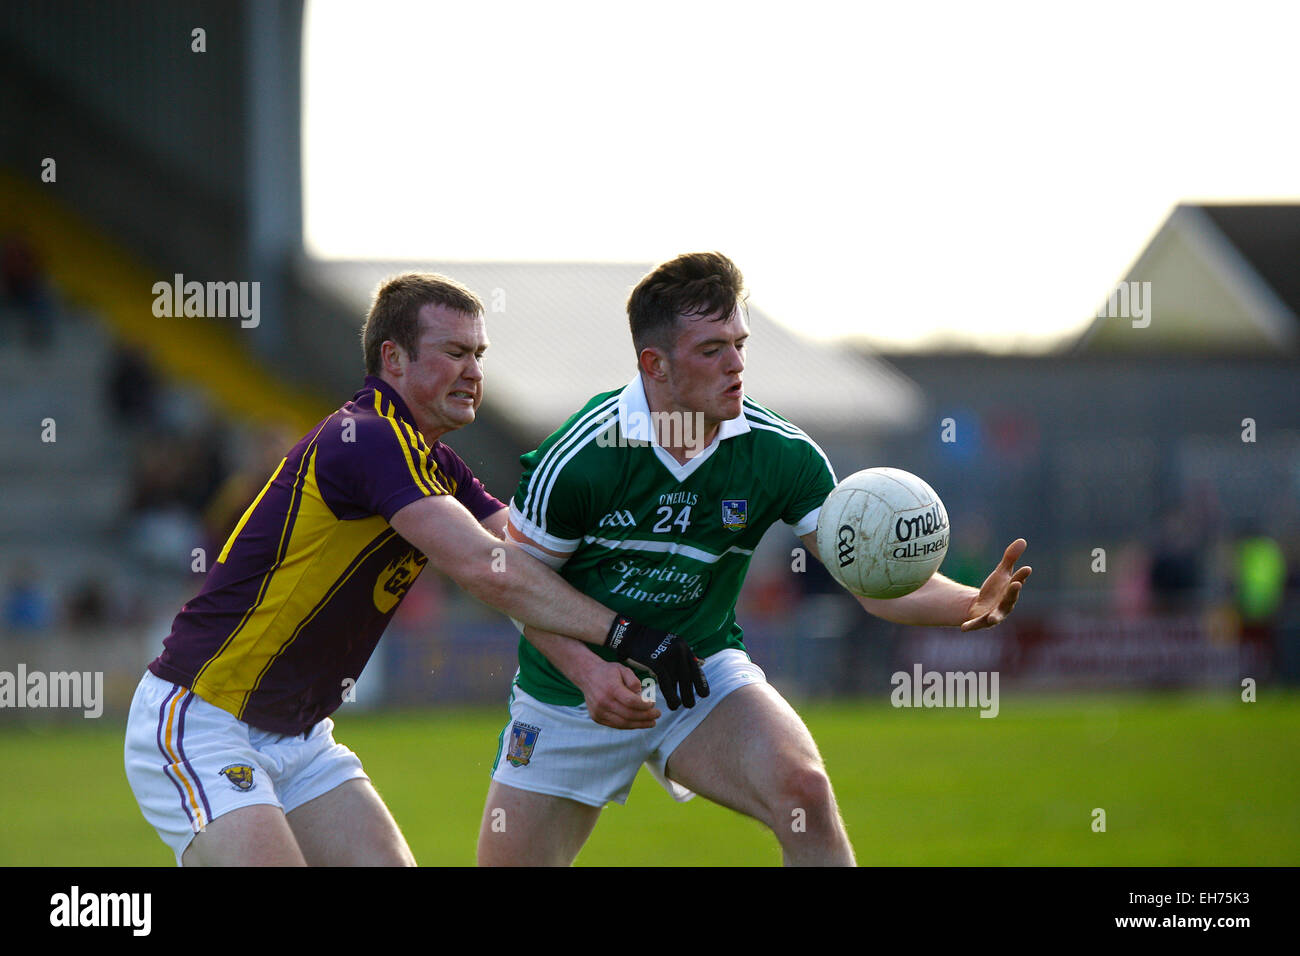 Wexford, Ireland. 8th March, 2015. 8th March 2015 -GAA  Allianz Football LeagueL Division 3 Played in Wexford Park. Wexford 1-16 Vs  Limerick 2-12 Credit:  Jimmy Whhittee/Alamy Live News Stock Photo